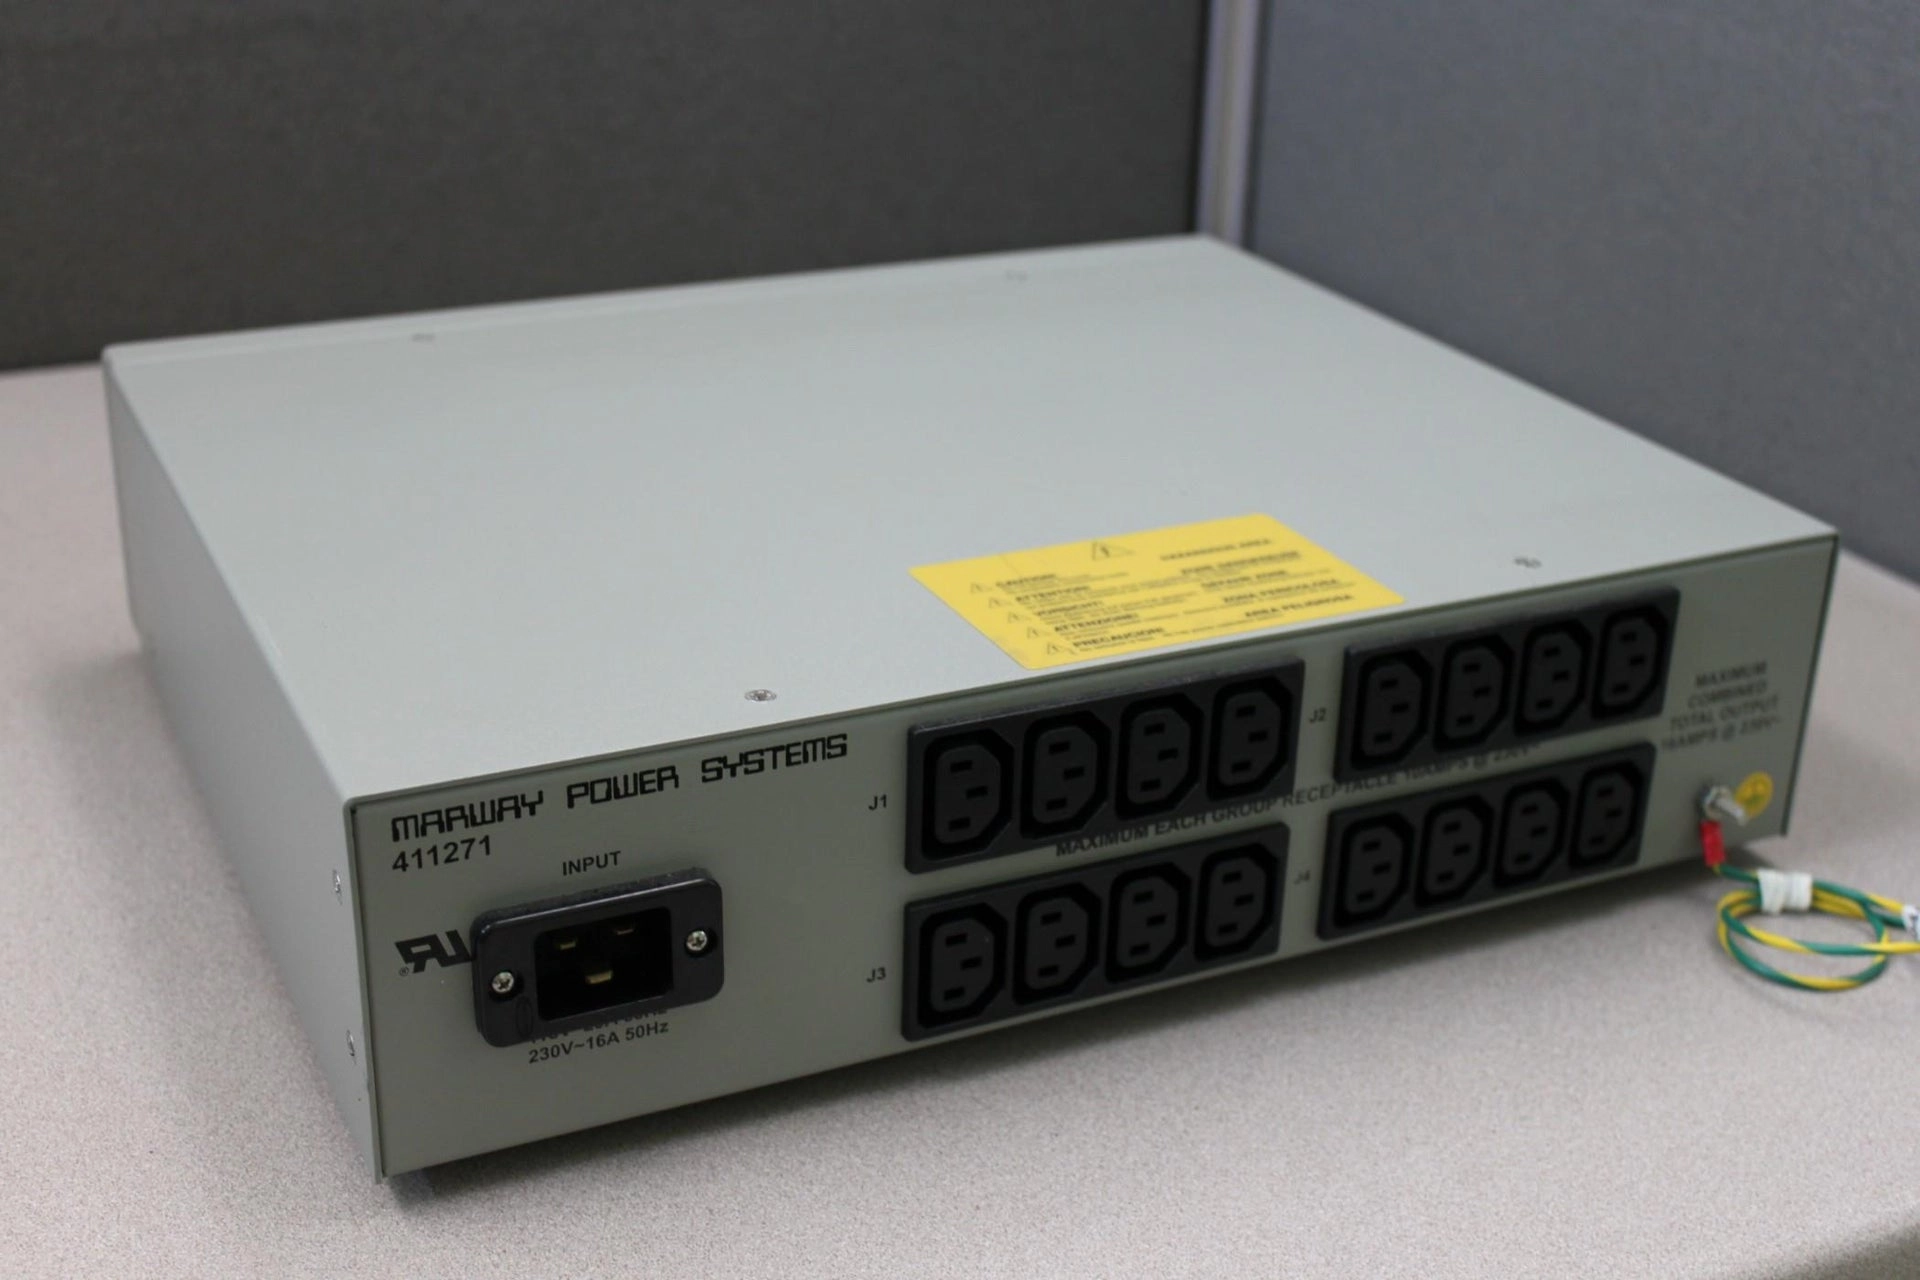 Marway Power Systems 411271 Power Distribution Unit from Affymetrix GeneChip